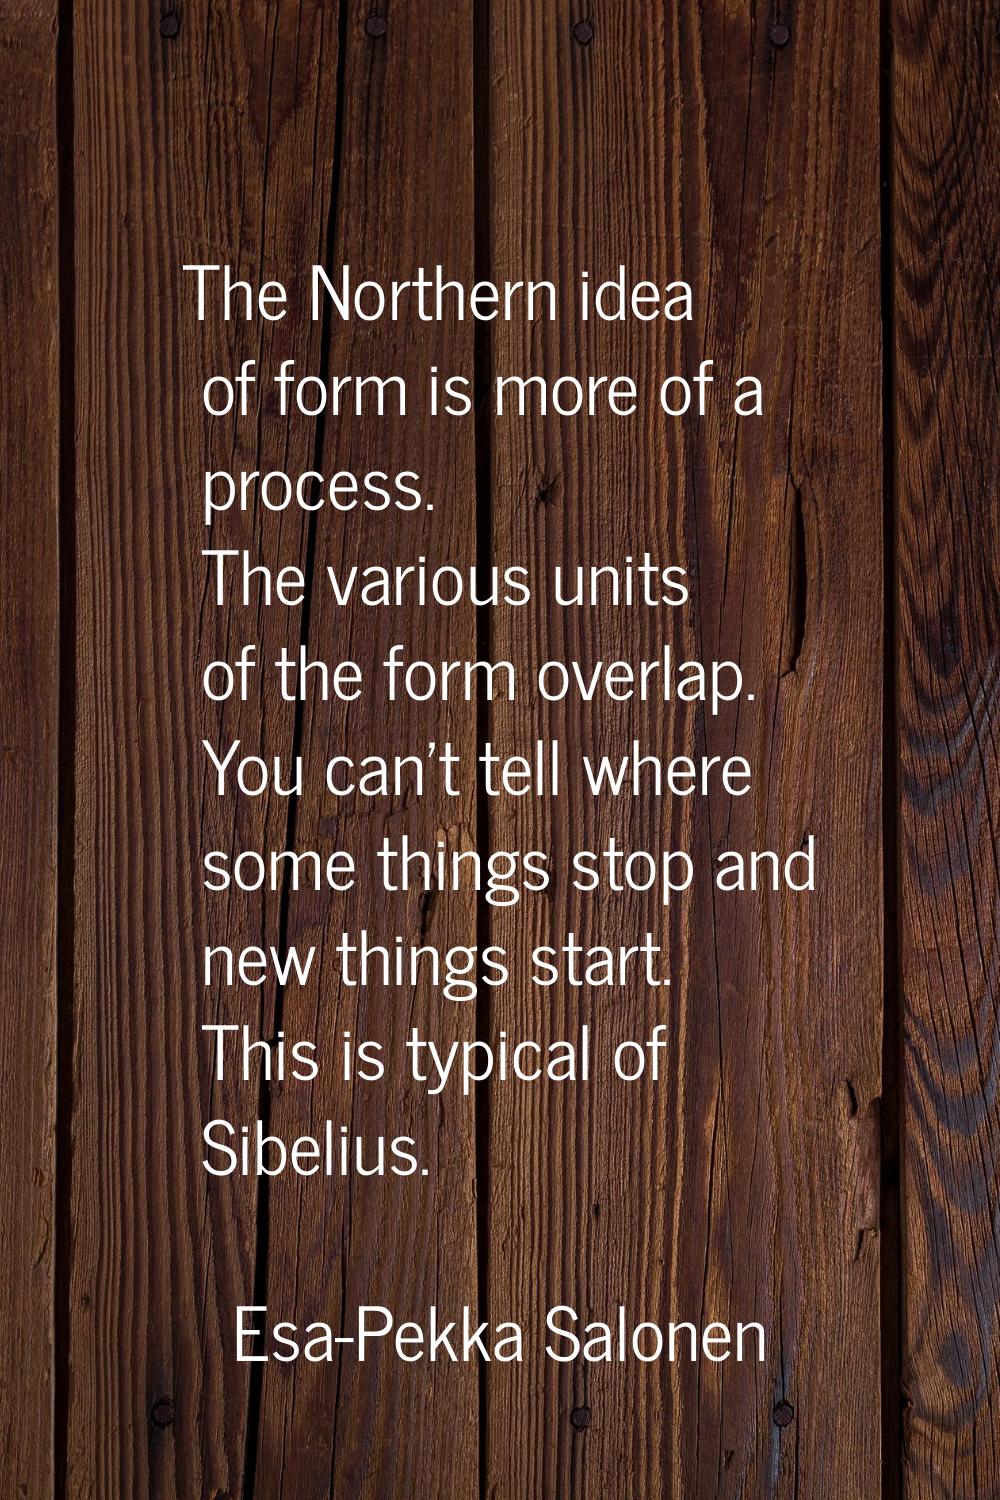 The Northern idea of form is more of a process. The various units of the form overlap. You can't te